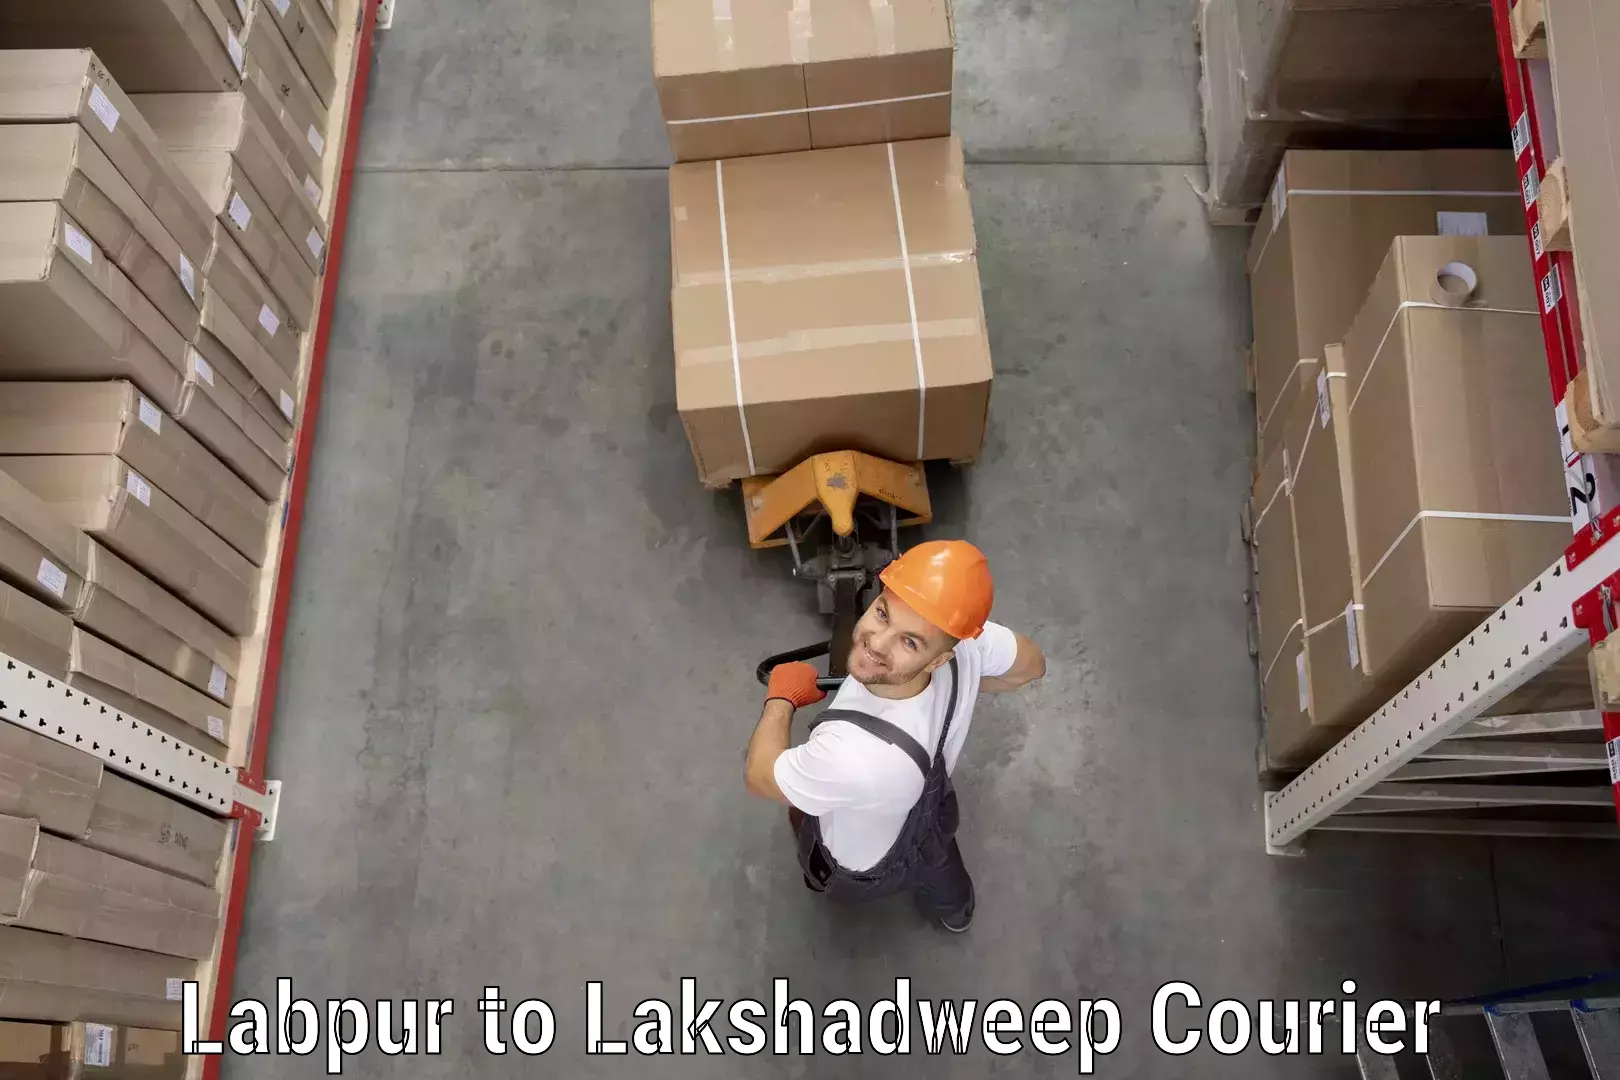 Pharmaceutical courier Labpur to Lakshadweep